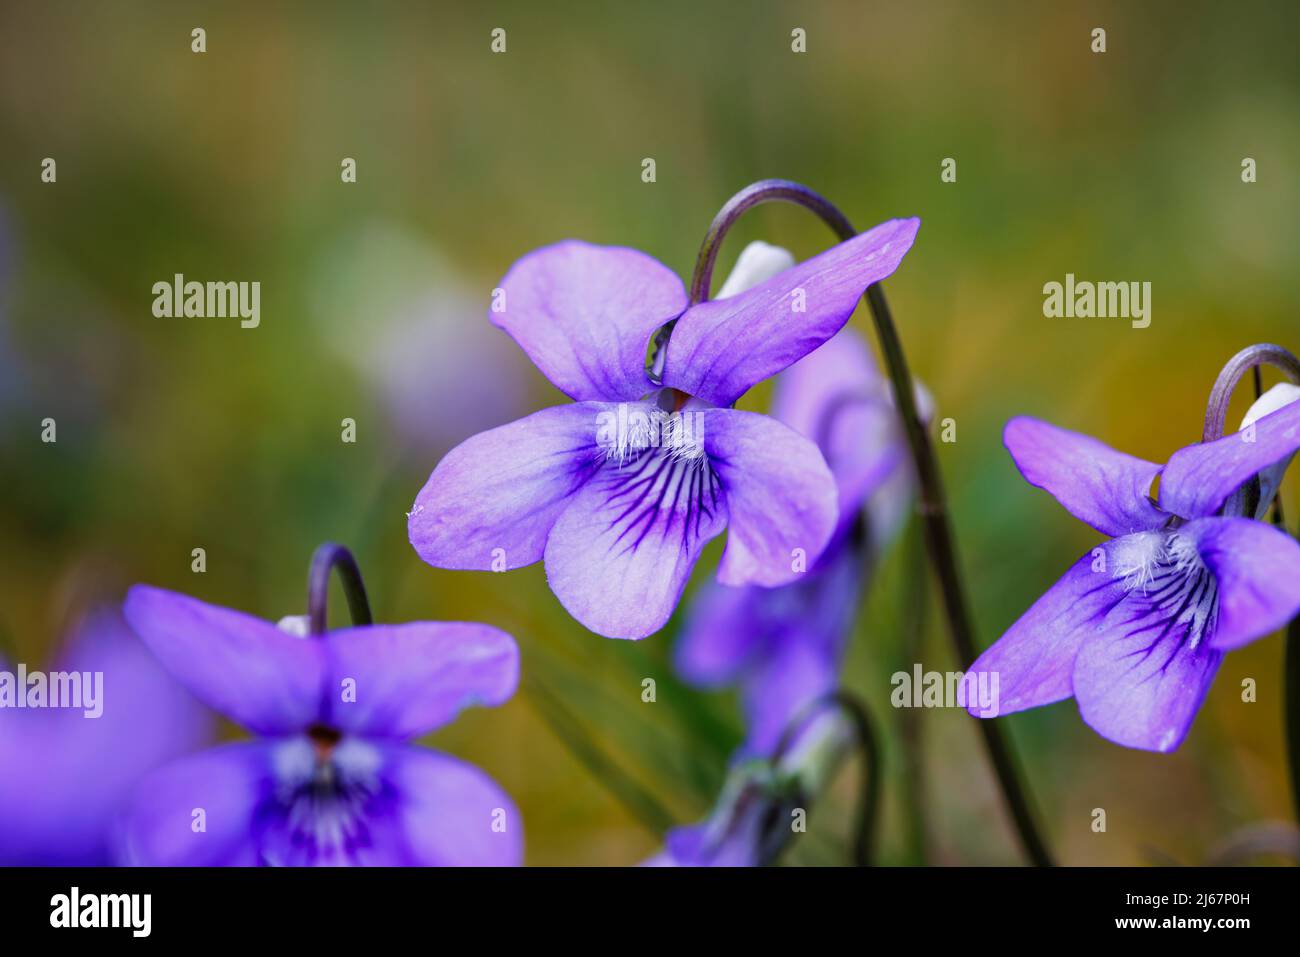 Wild violet (Common Dog-violet, Viola riviniana), a common weed growing in a lawn flowering in early spring in a garden in Surrey, south-east England Stock Photo